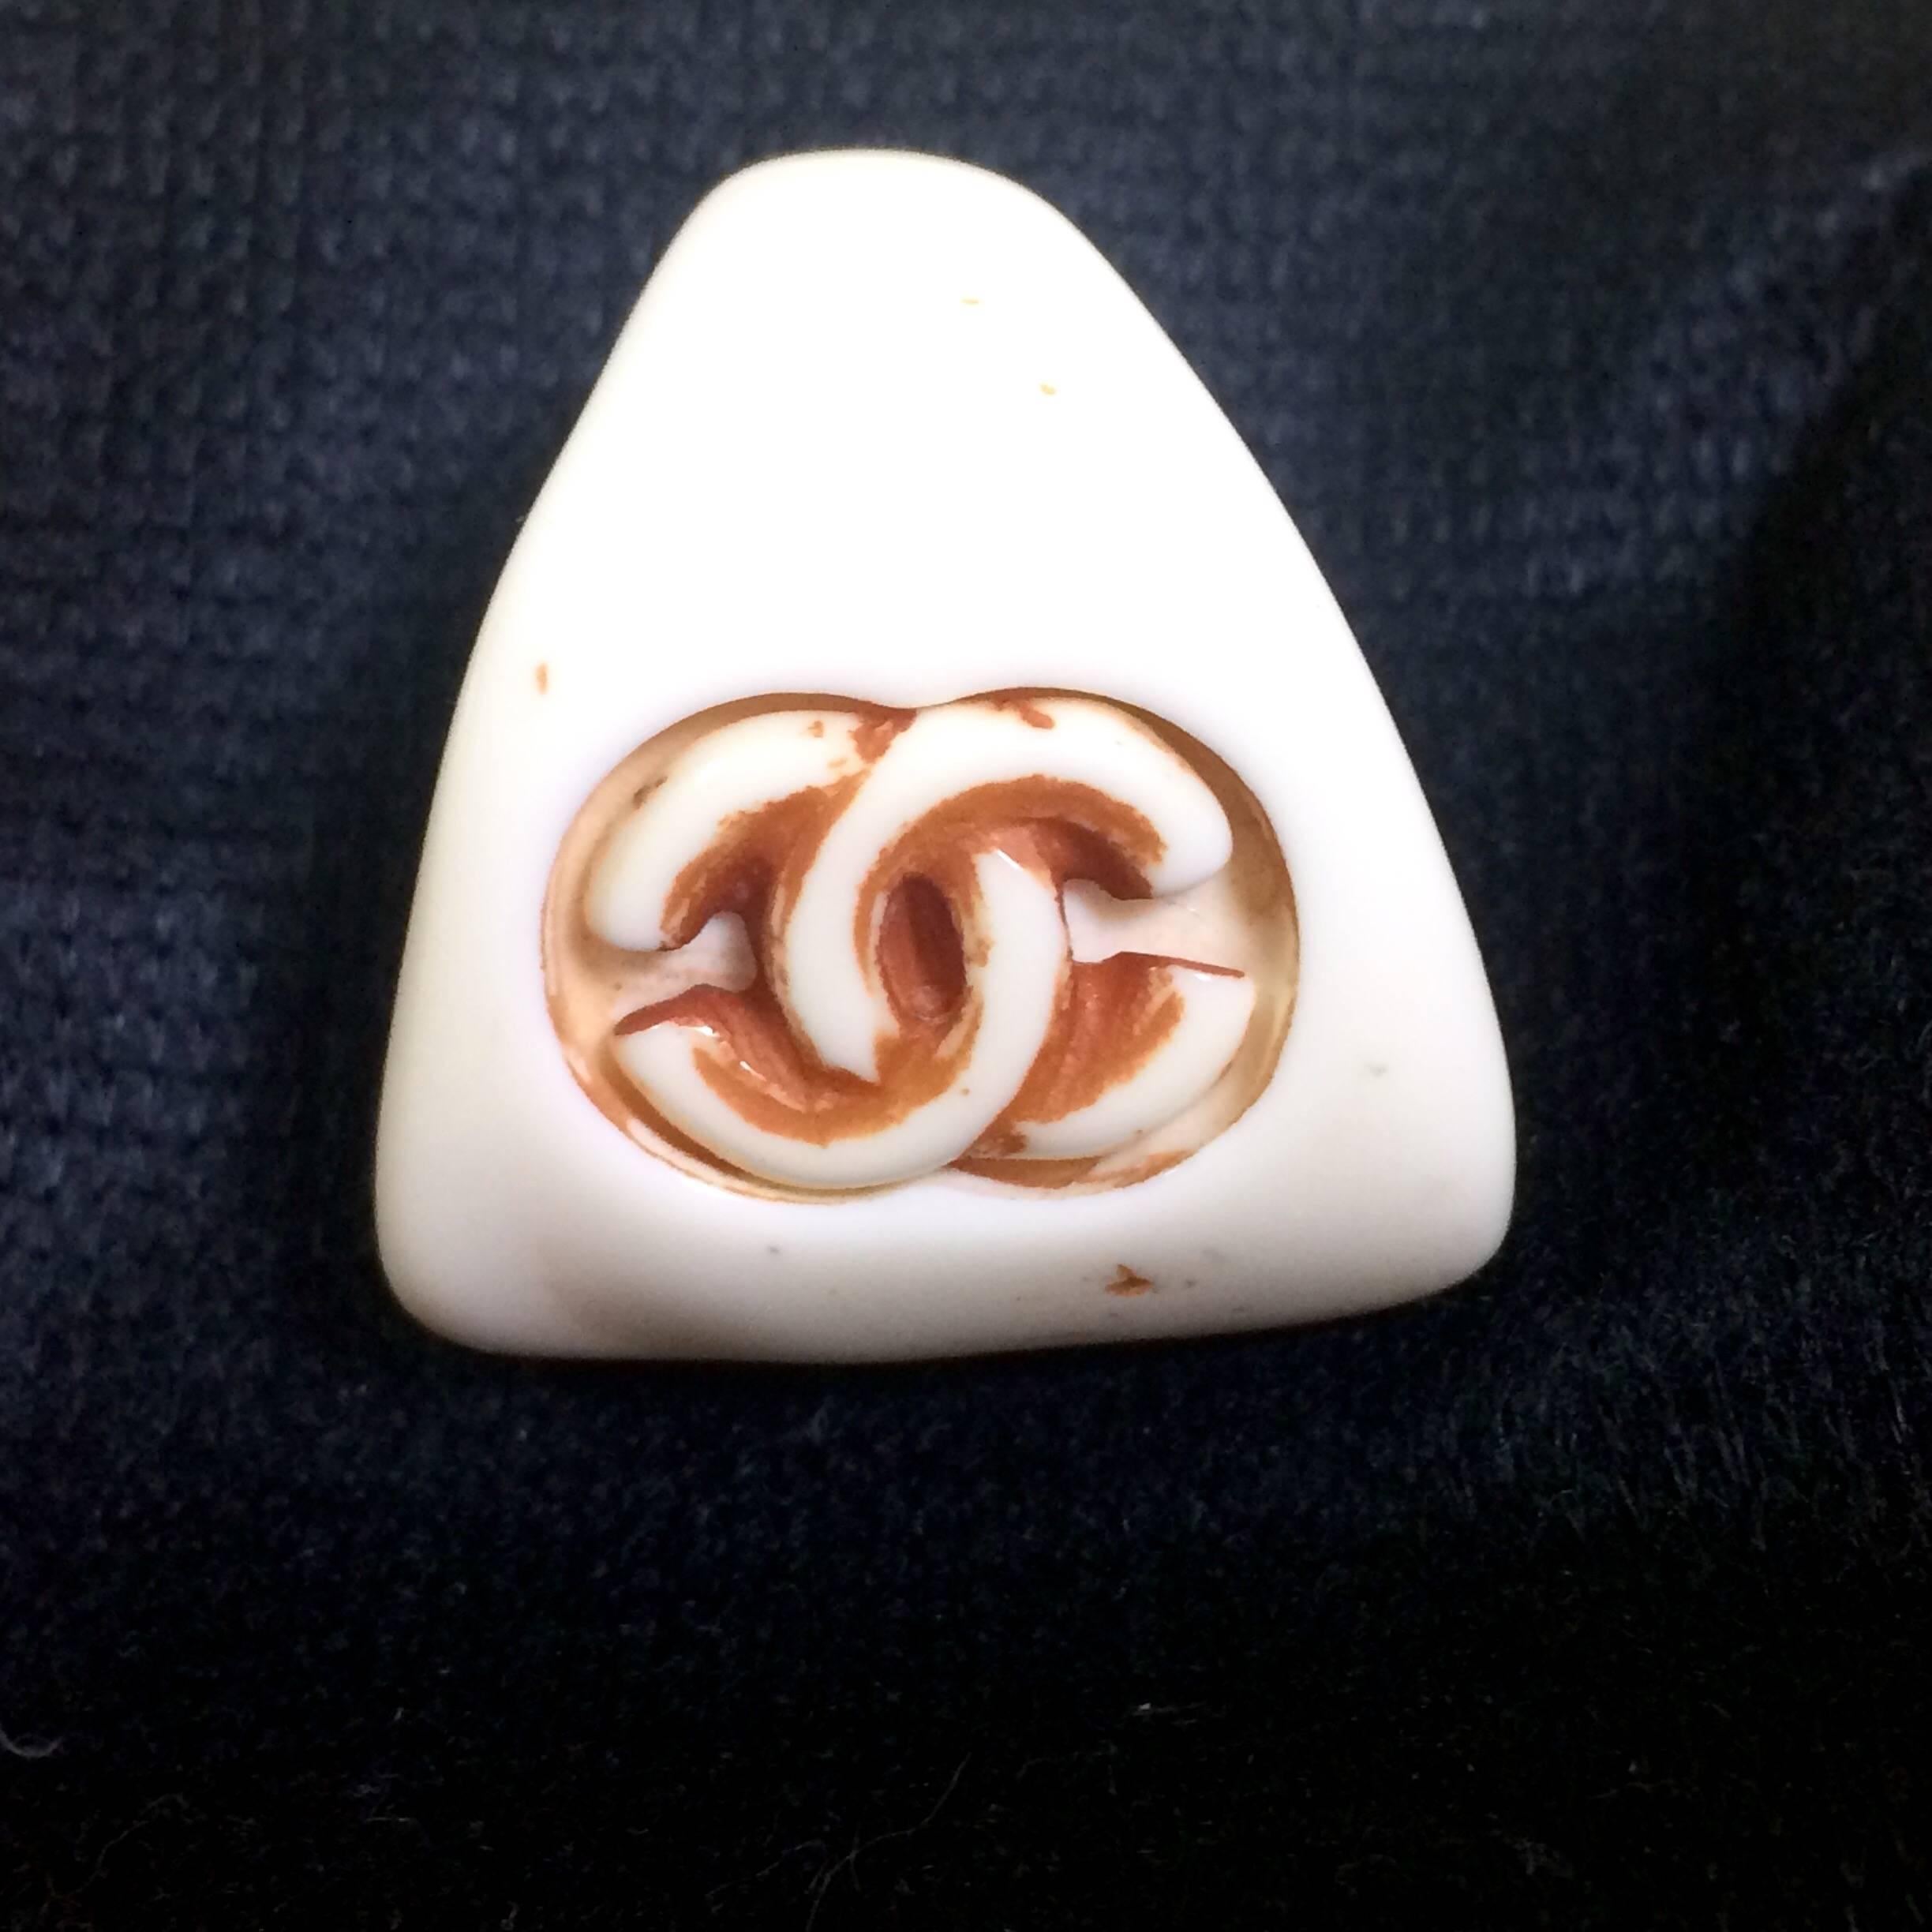 Vintage CHANEL ivory bone, stone design thick plastic ring with engraved CC mark. Rare Chanel vintage jewelry. Perfect gift.

Introducing another unique and fun vintage Chanel jewelry, ivory plastic ring in thick bone/stone design.
Great